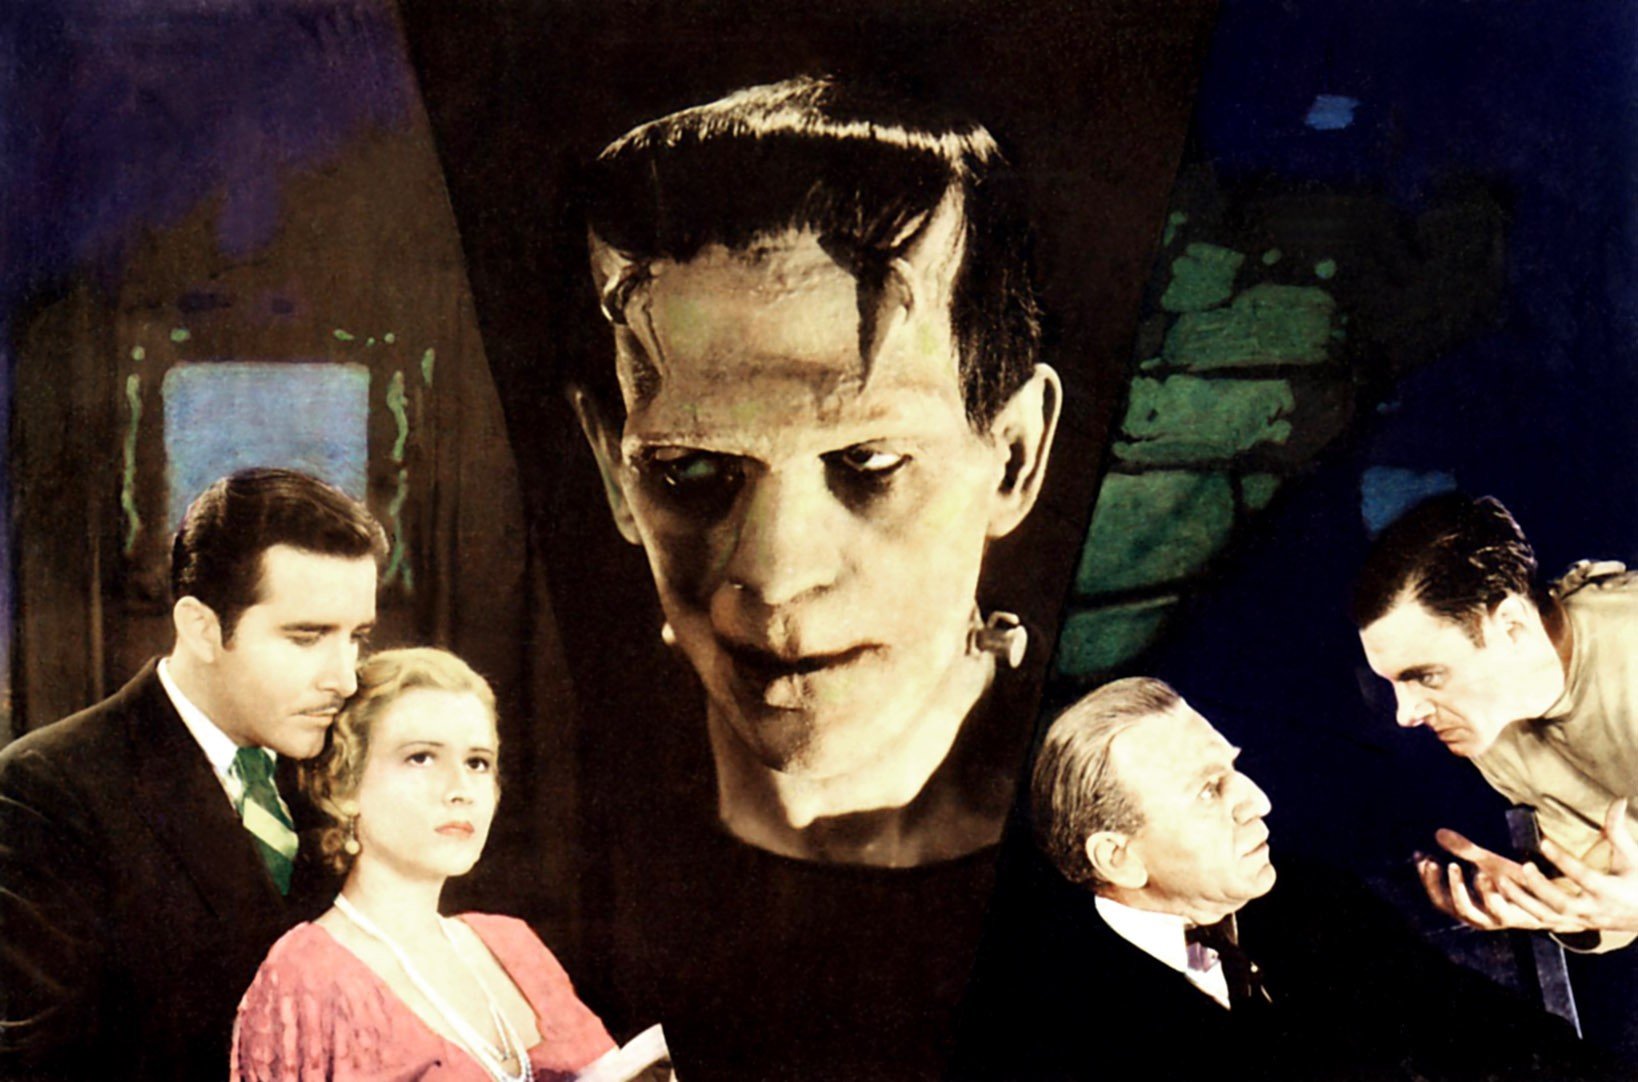 H. P. Lovecraft Loved (and Hated) These Classic Horror Movies